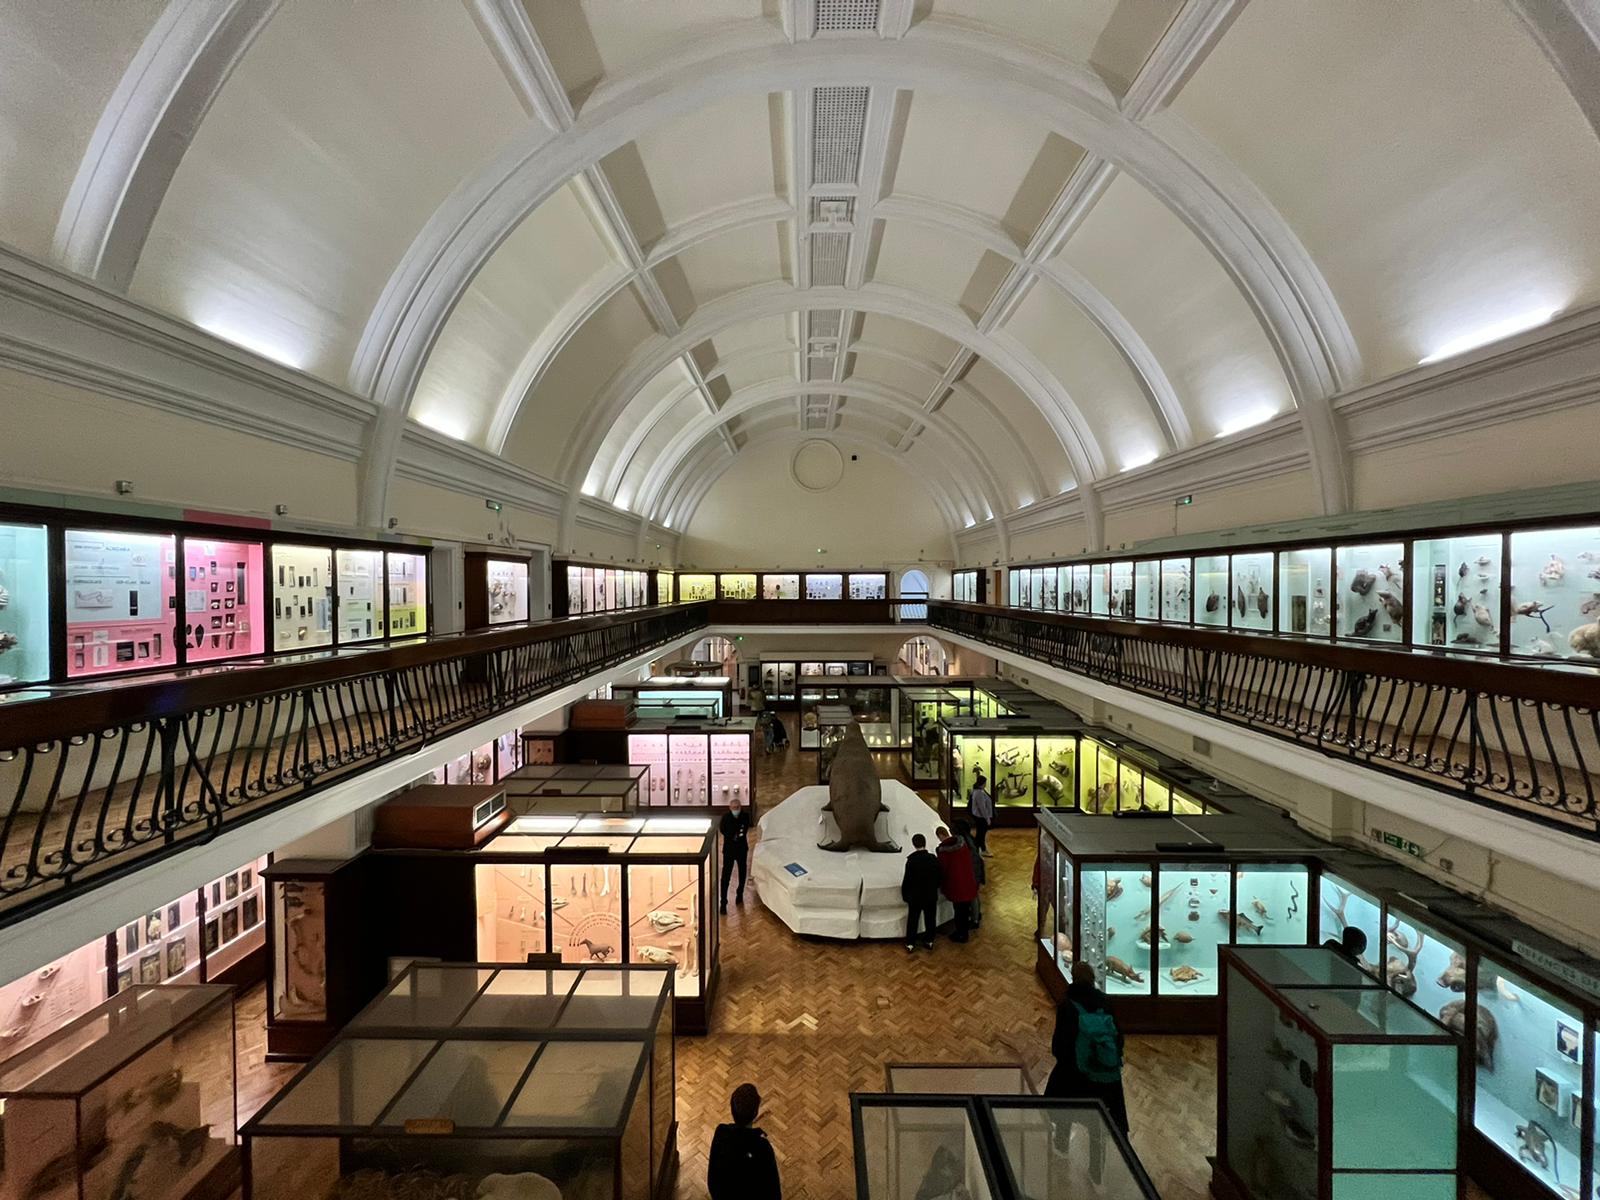 Horniman Museum interior featuring exhibits with multi-coloured lighting across the room.